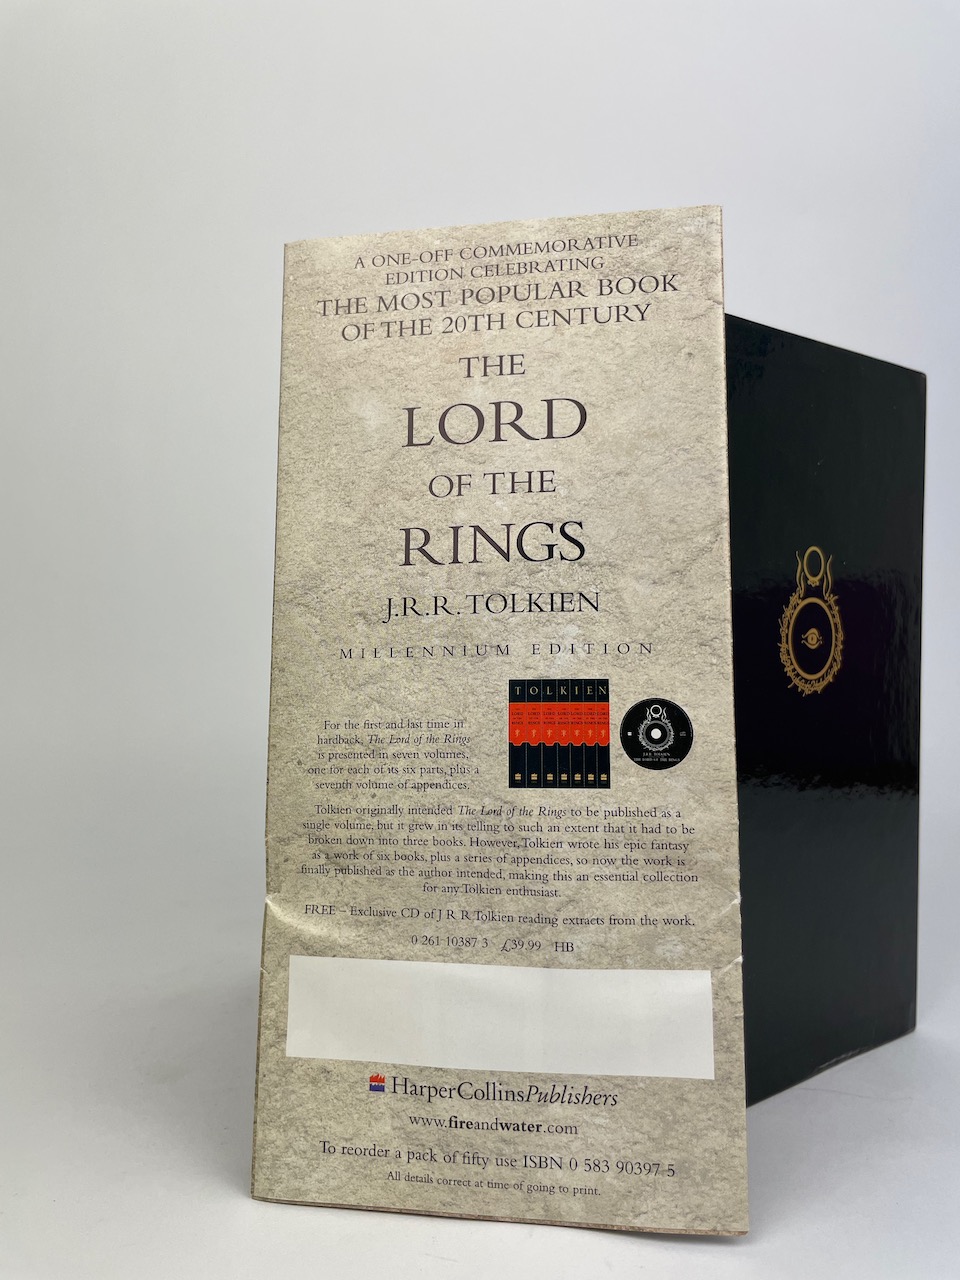 The Lord of the Rings 7 Volume Millenium Edition with CD 9